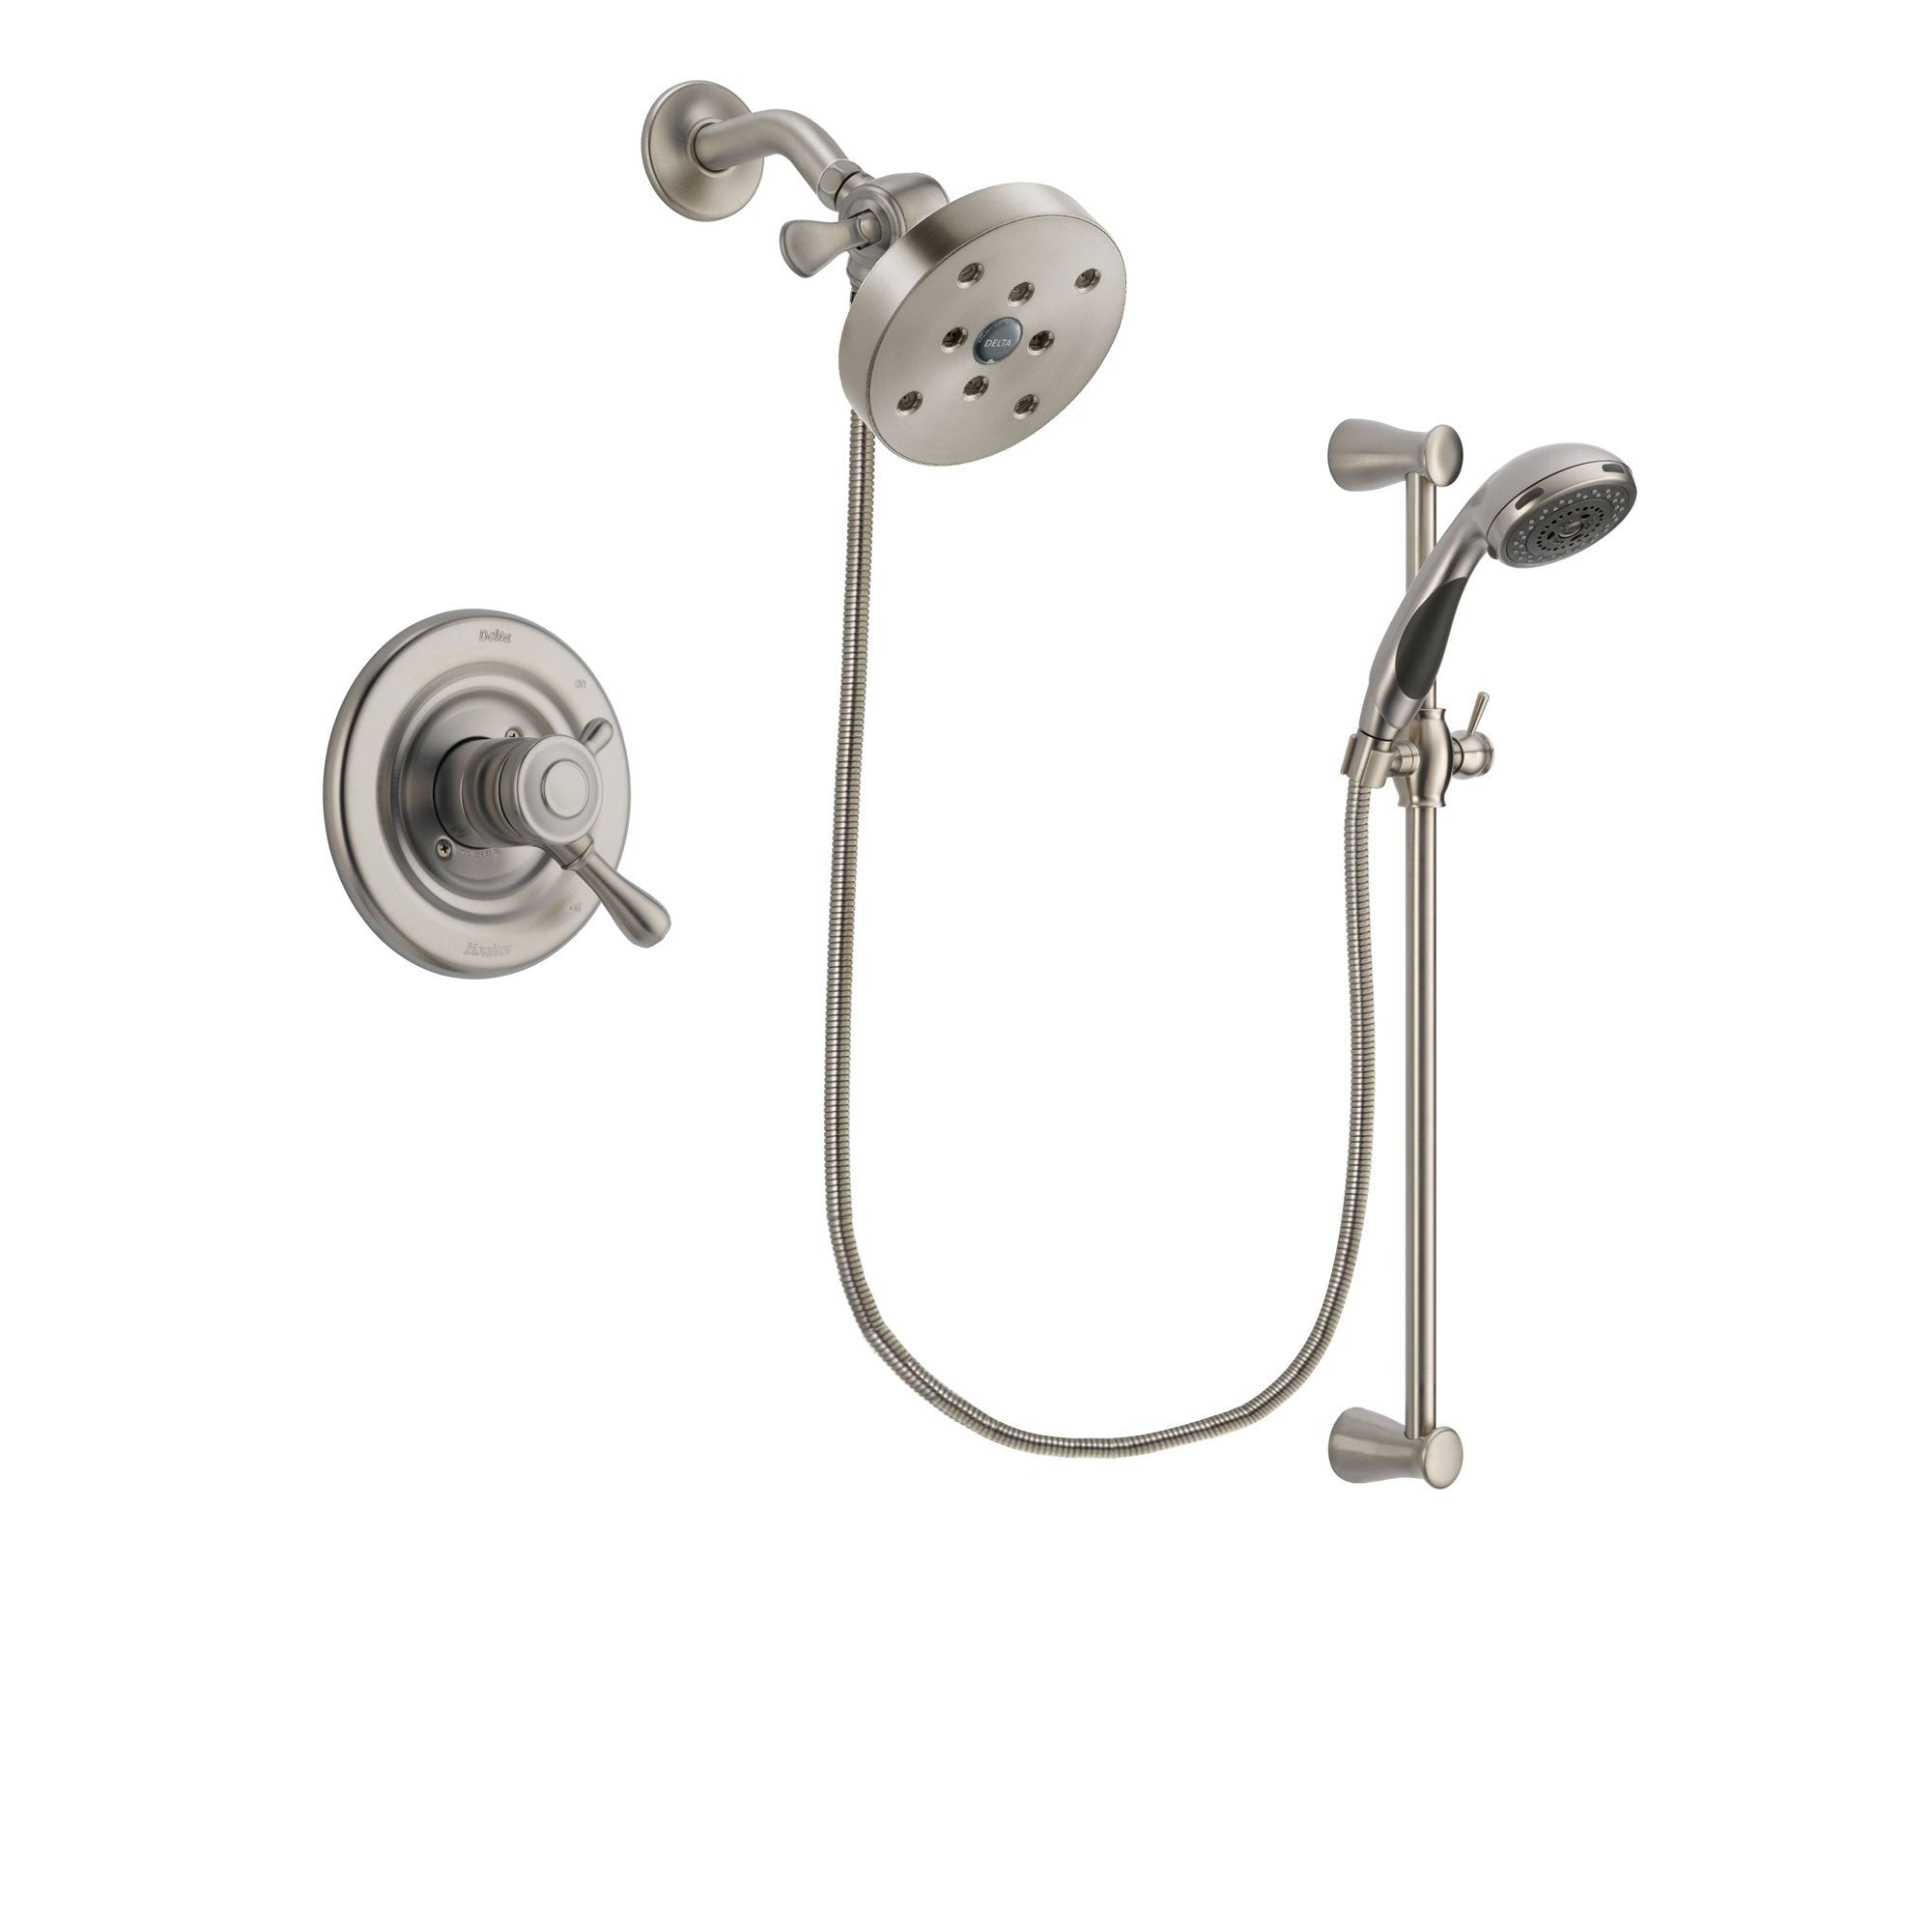 Delta Leland Stainless Steel Finish Shower Faucet System w/ Hand Spray DSP1642V